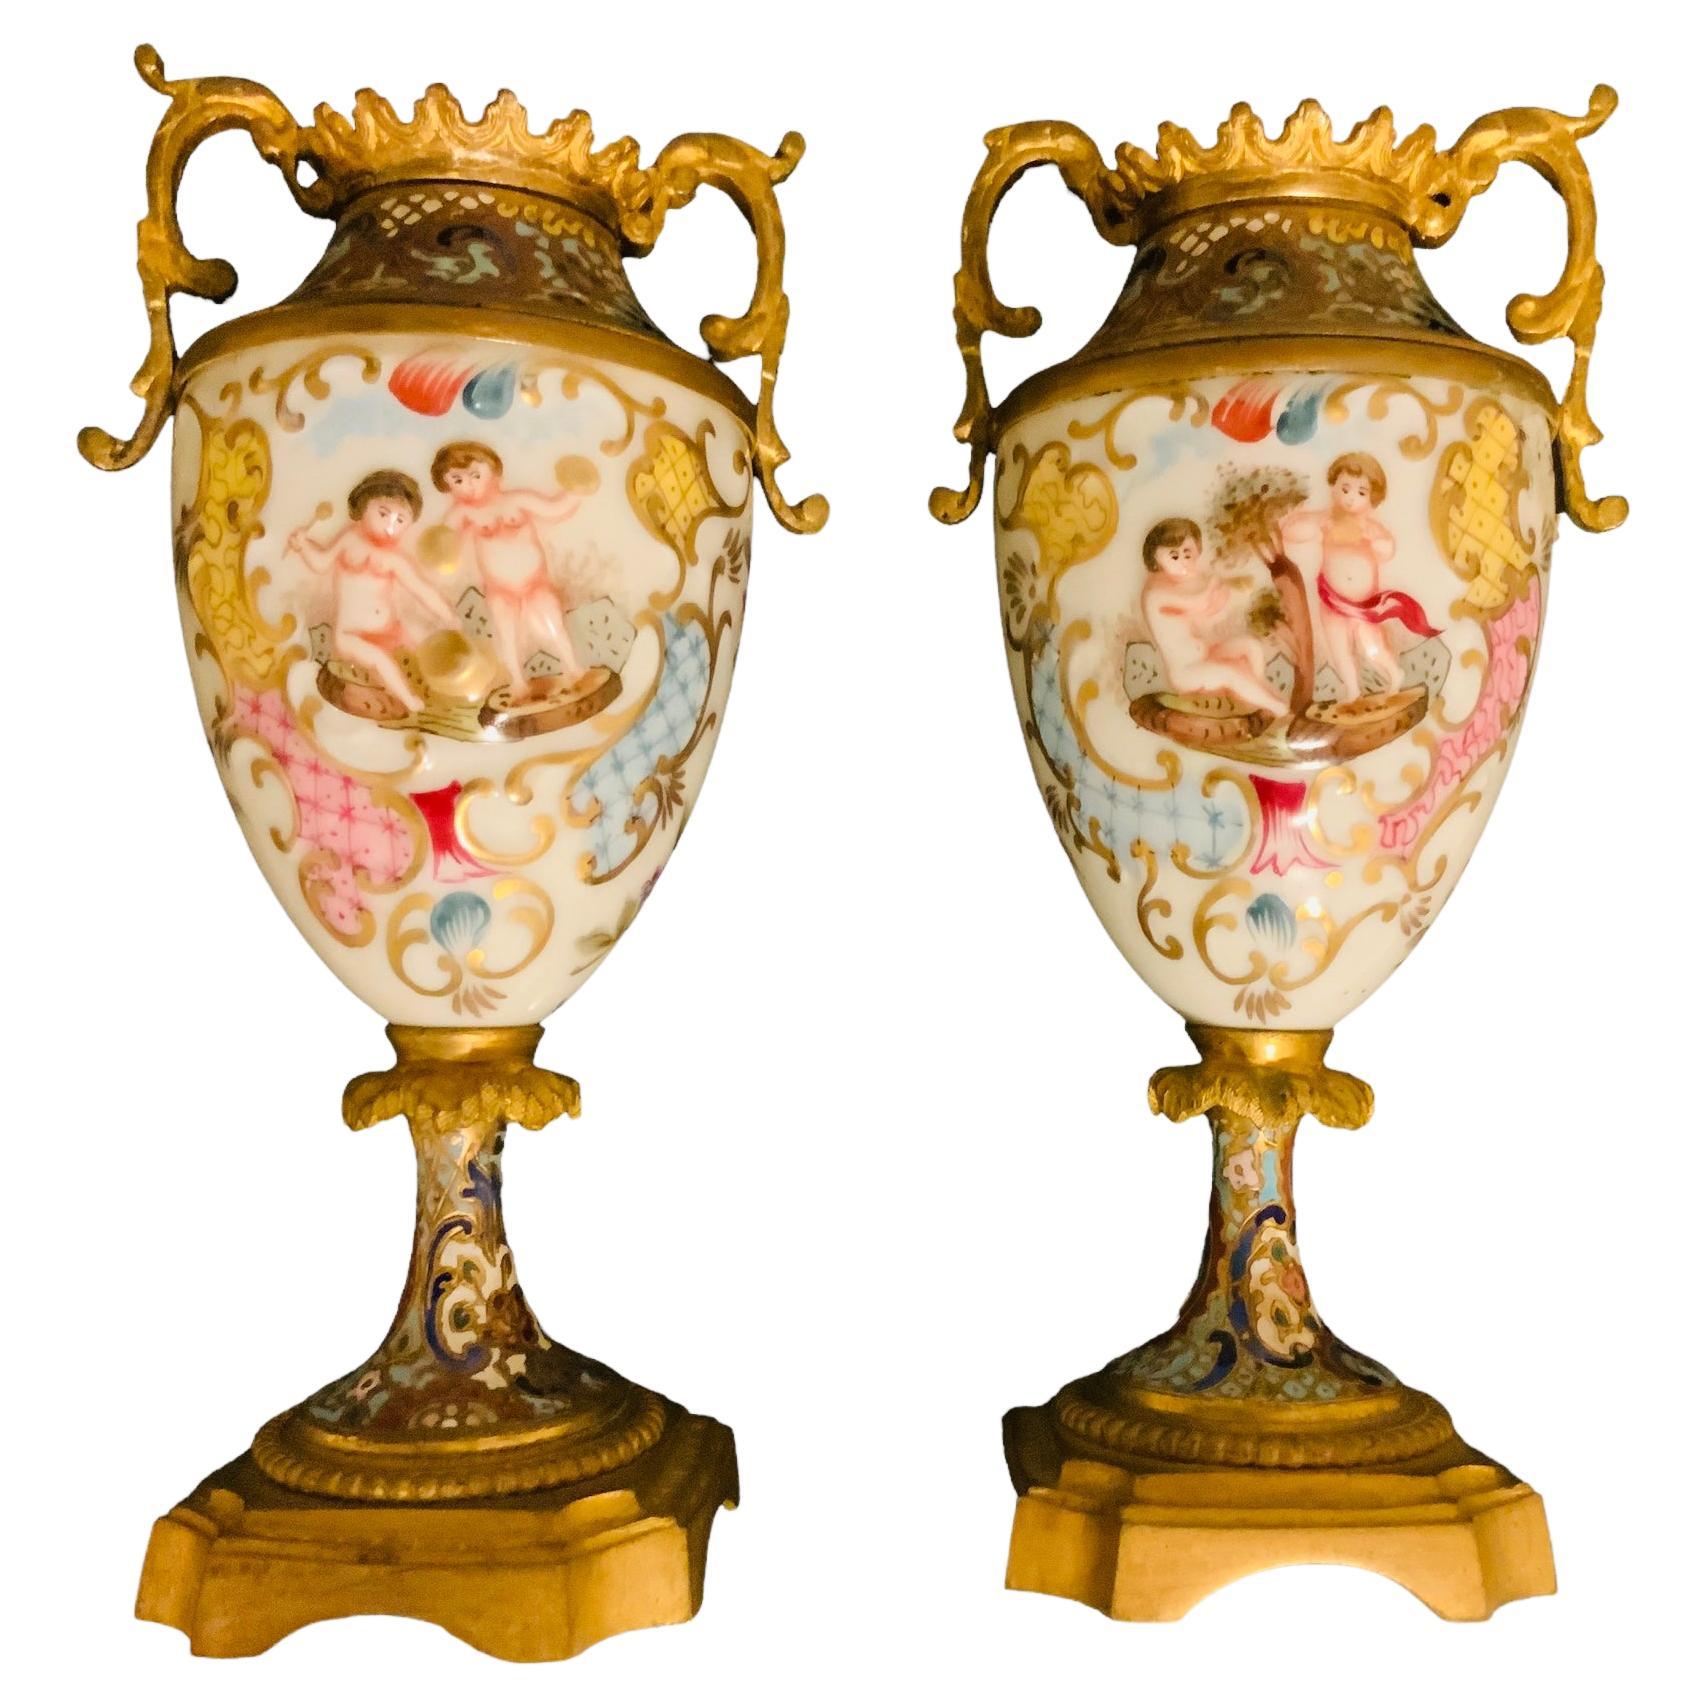 This is a pair of Champleve and Capodimonte porcelain small urns. It depicts a pair of urns with colorful champleve pattern of flowers and scrolls at the neck, shoulder and feet area. The body of the urn is made of porcelain and decorated with a